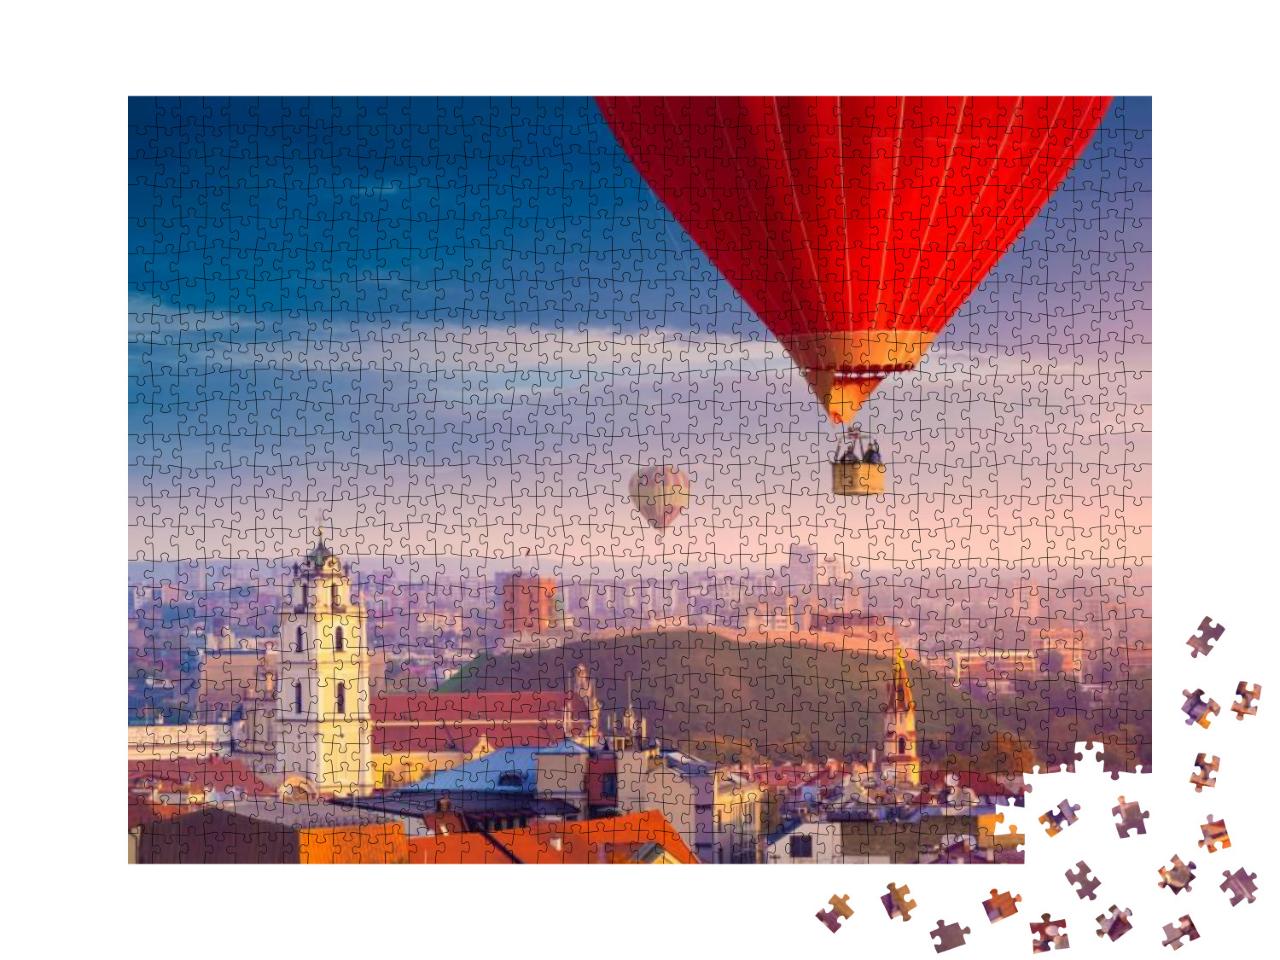 Aerial View of Vilnius, Lithuania... Jigsaw Puzzle with 1000 pieces